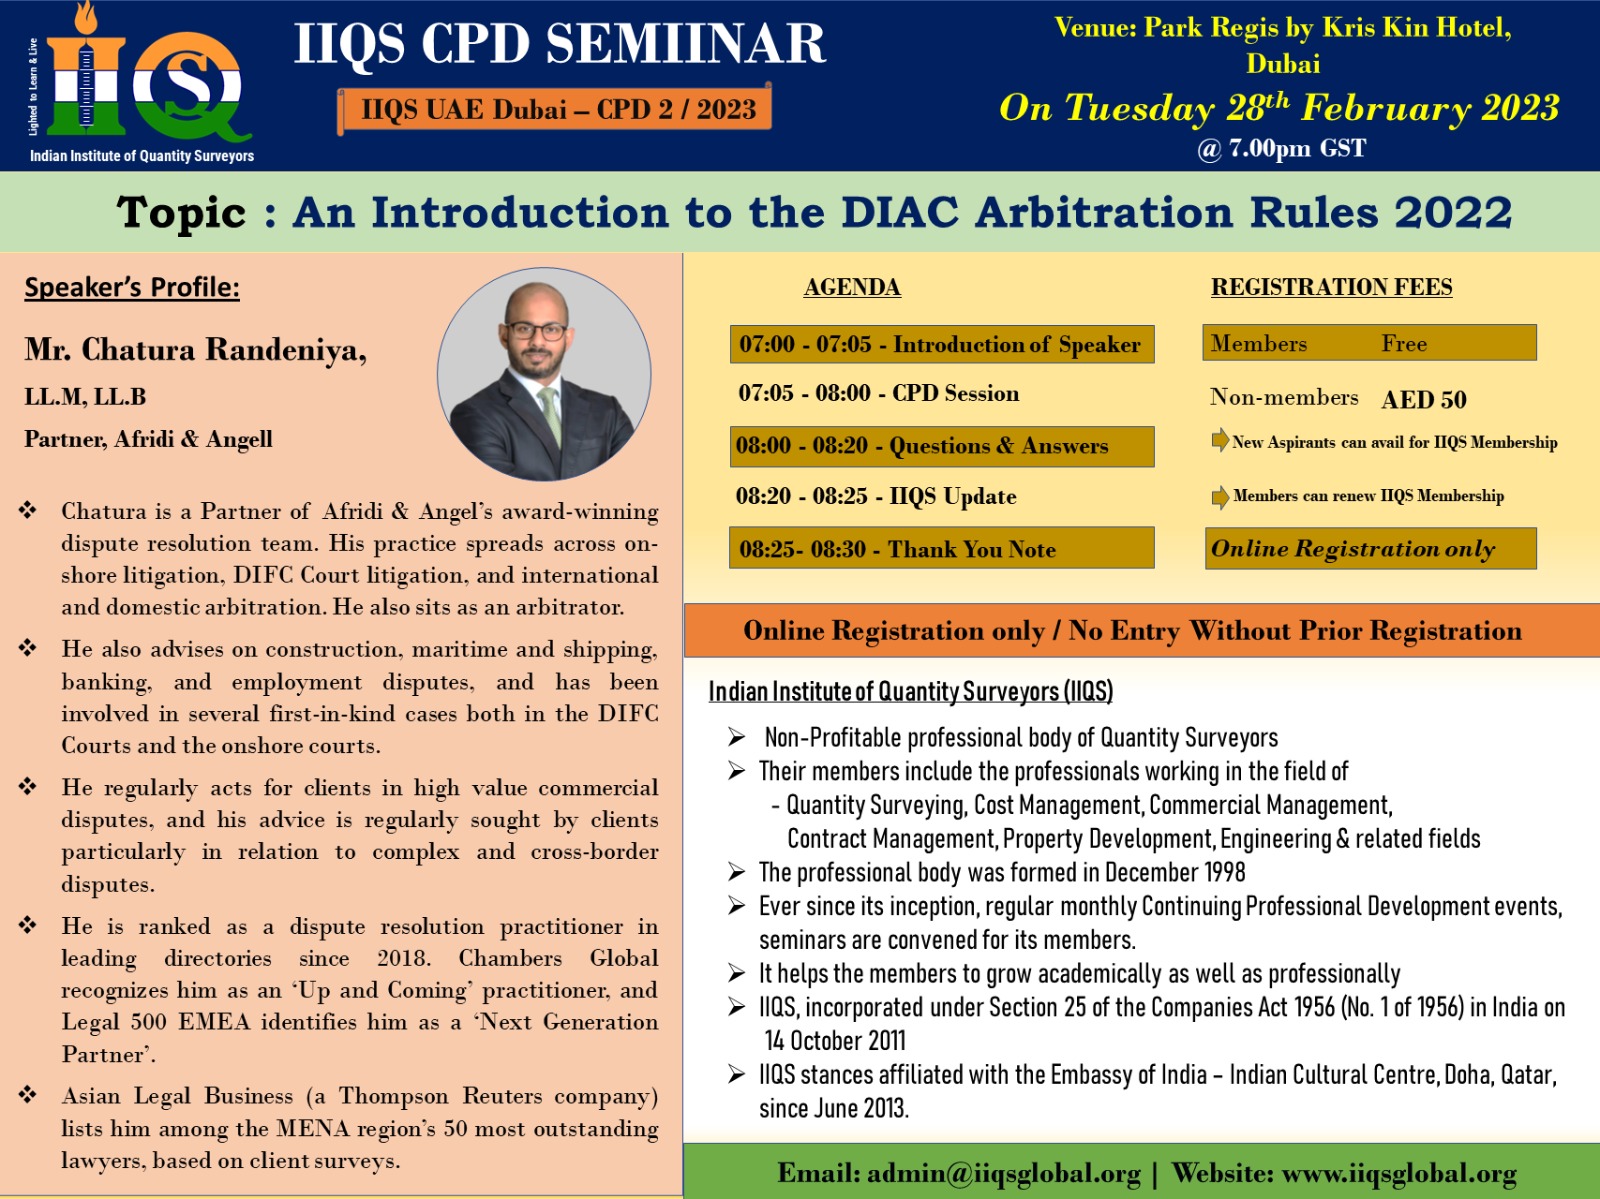 An introduction to the DIAC Arbitration Rules 2022